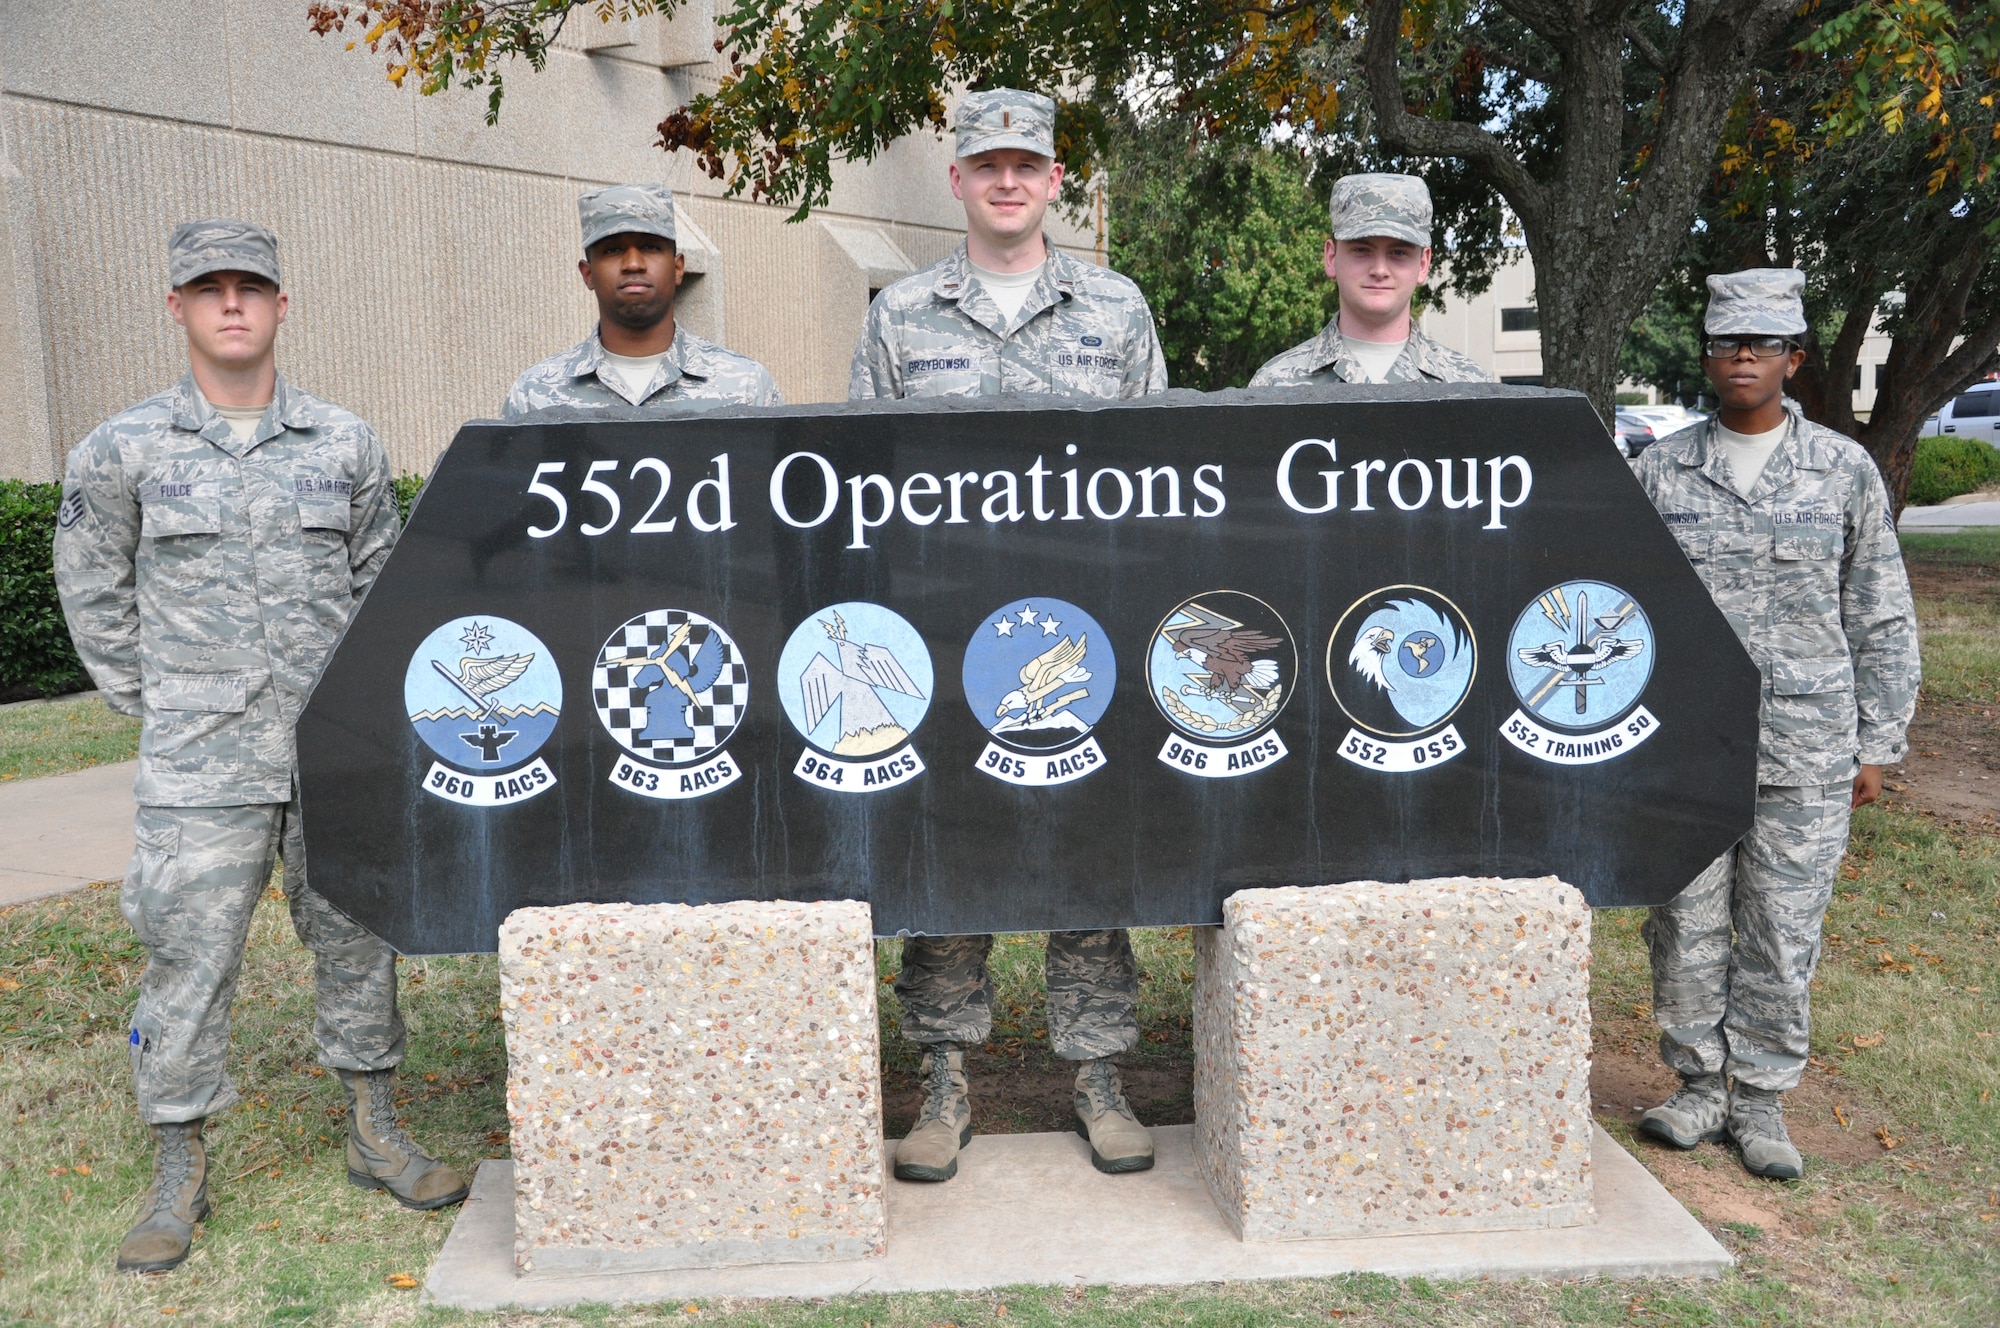 From left, Staff Sgt. Matthew Fulce, Airman 1st Class Frederick Thomas, 2nd Lt. Dawid Grzybowski, Airman 1st Class Ryan O’Gallager and Airman 1st Class Azelia Robinson are the first graduates of the new Air Force-wide E-3 Intelligence Initial Qualification Course. These five Airmen from the 552nd Air Control Wing graduated from the course Oct. 21. (Air Force photo by Darren D. Heusel)